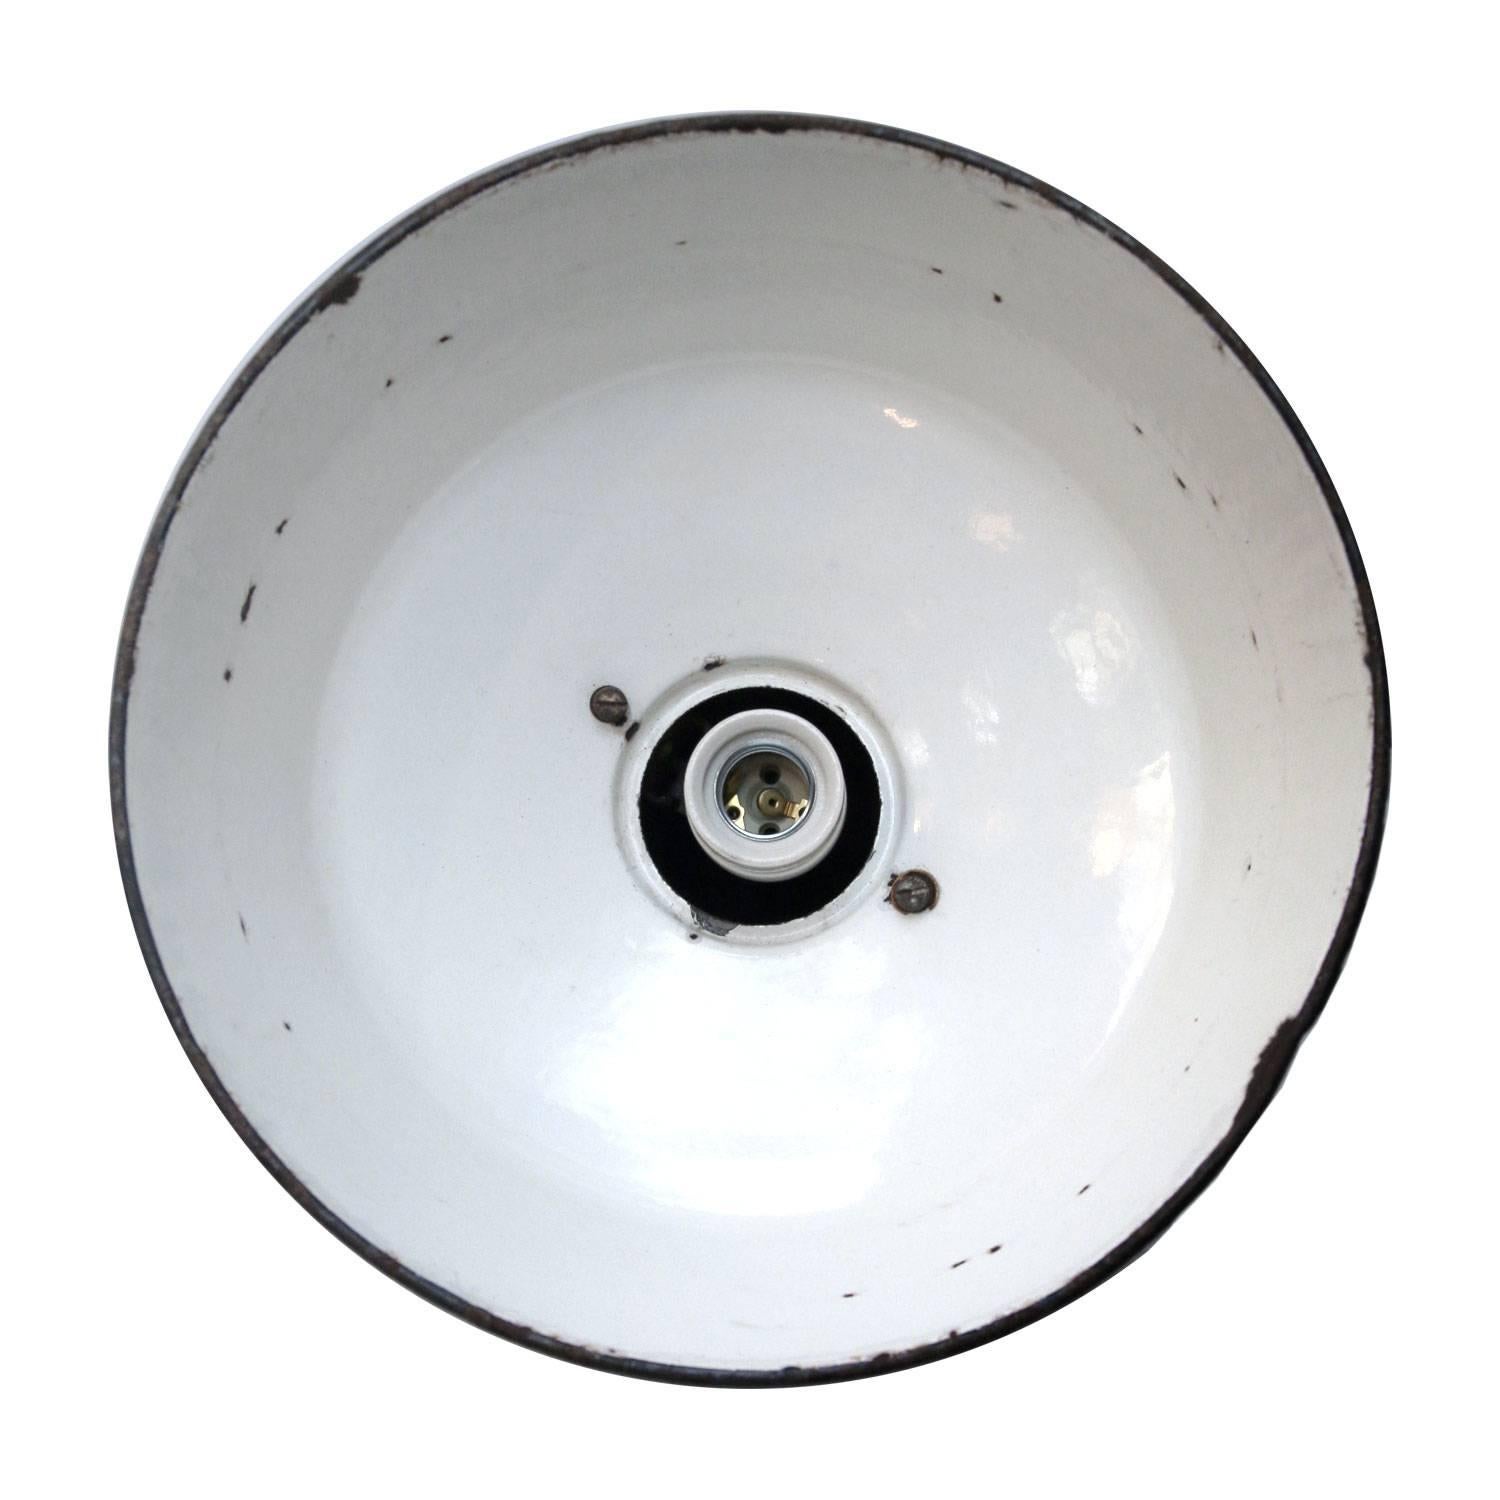 Mindszent s petrol. Industrial pendant. Petrol enamel white interior cast iron top.

Weight: 2.7 kg / 6 lb

All lamps have been made suitable by international standards for incandescent light bulbs, energy-efficient and LED bulbs. E26/E27 bulb